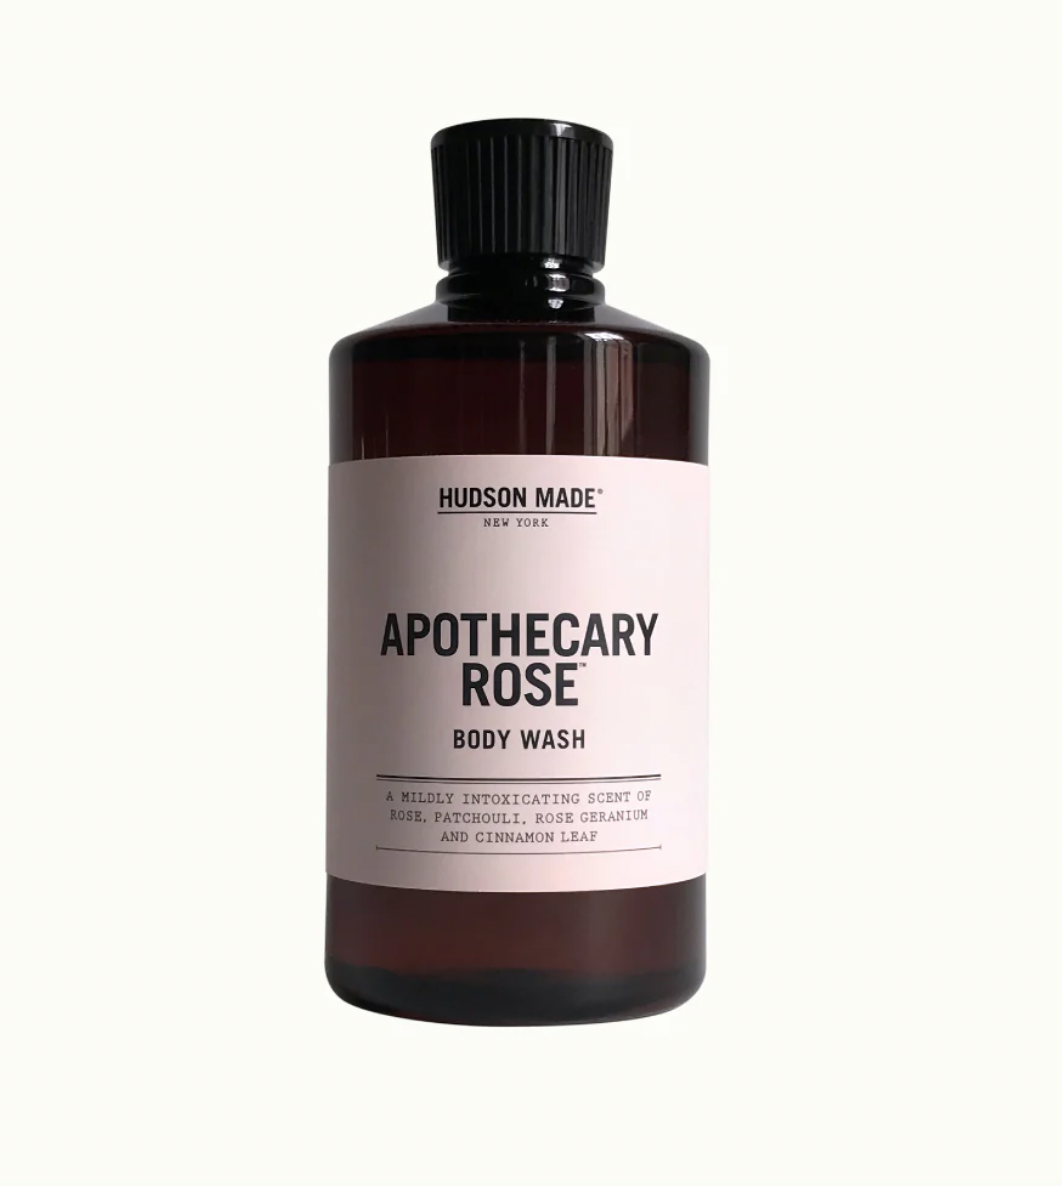 Apothecary rose deluxe gift box by Hudson Made